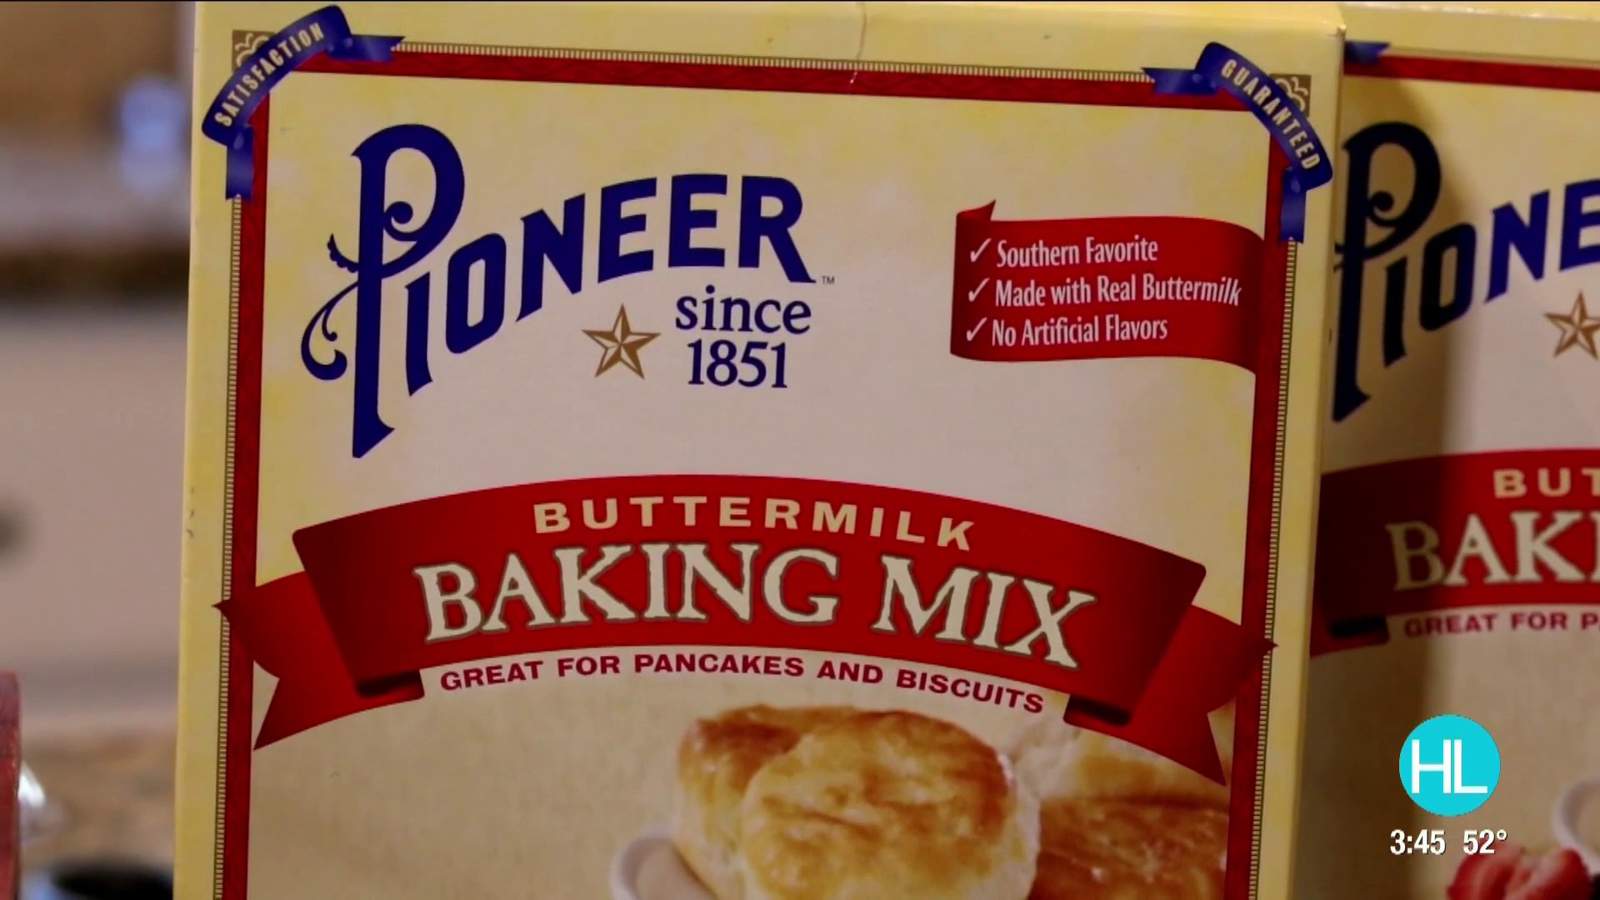 Pioneer products helping to simplify homecooked favorites